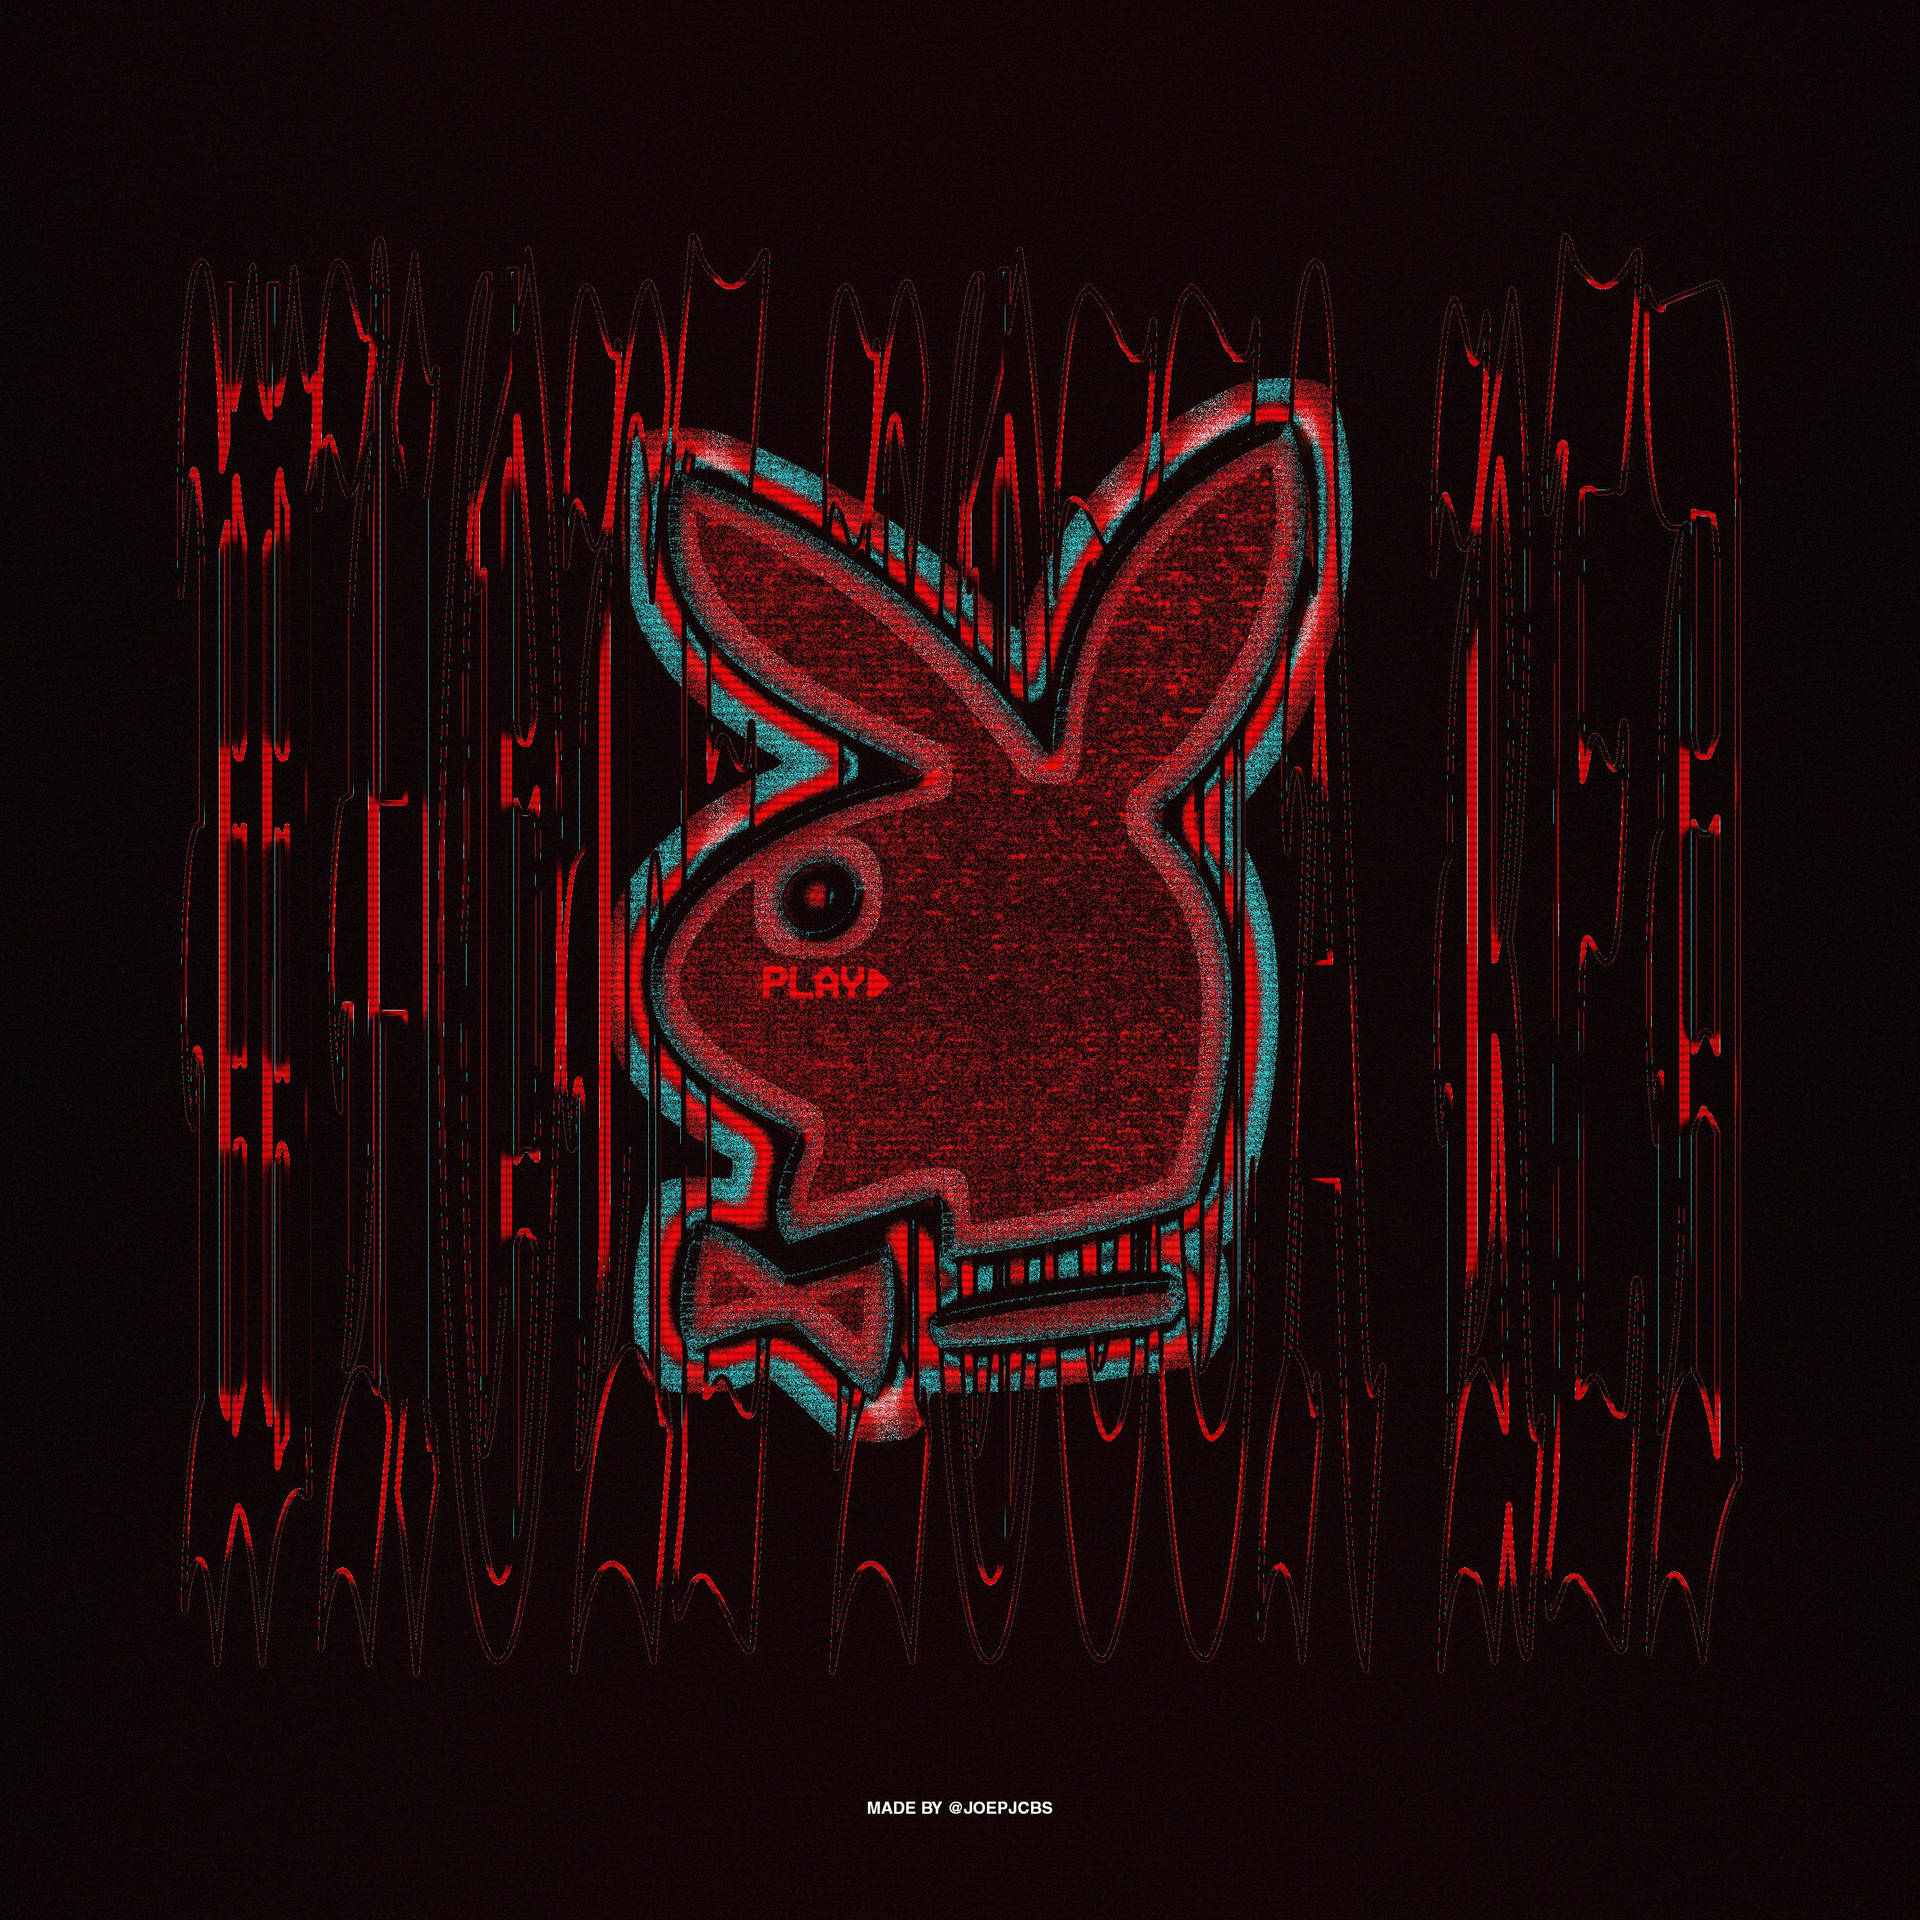 Whole Lotta Red Playboy Sign Wallpaper